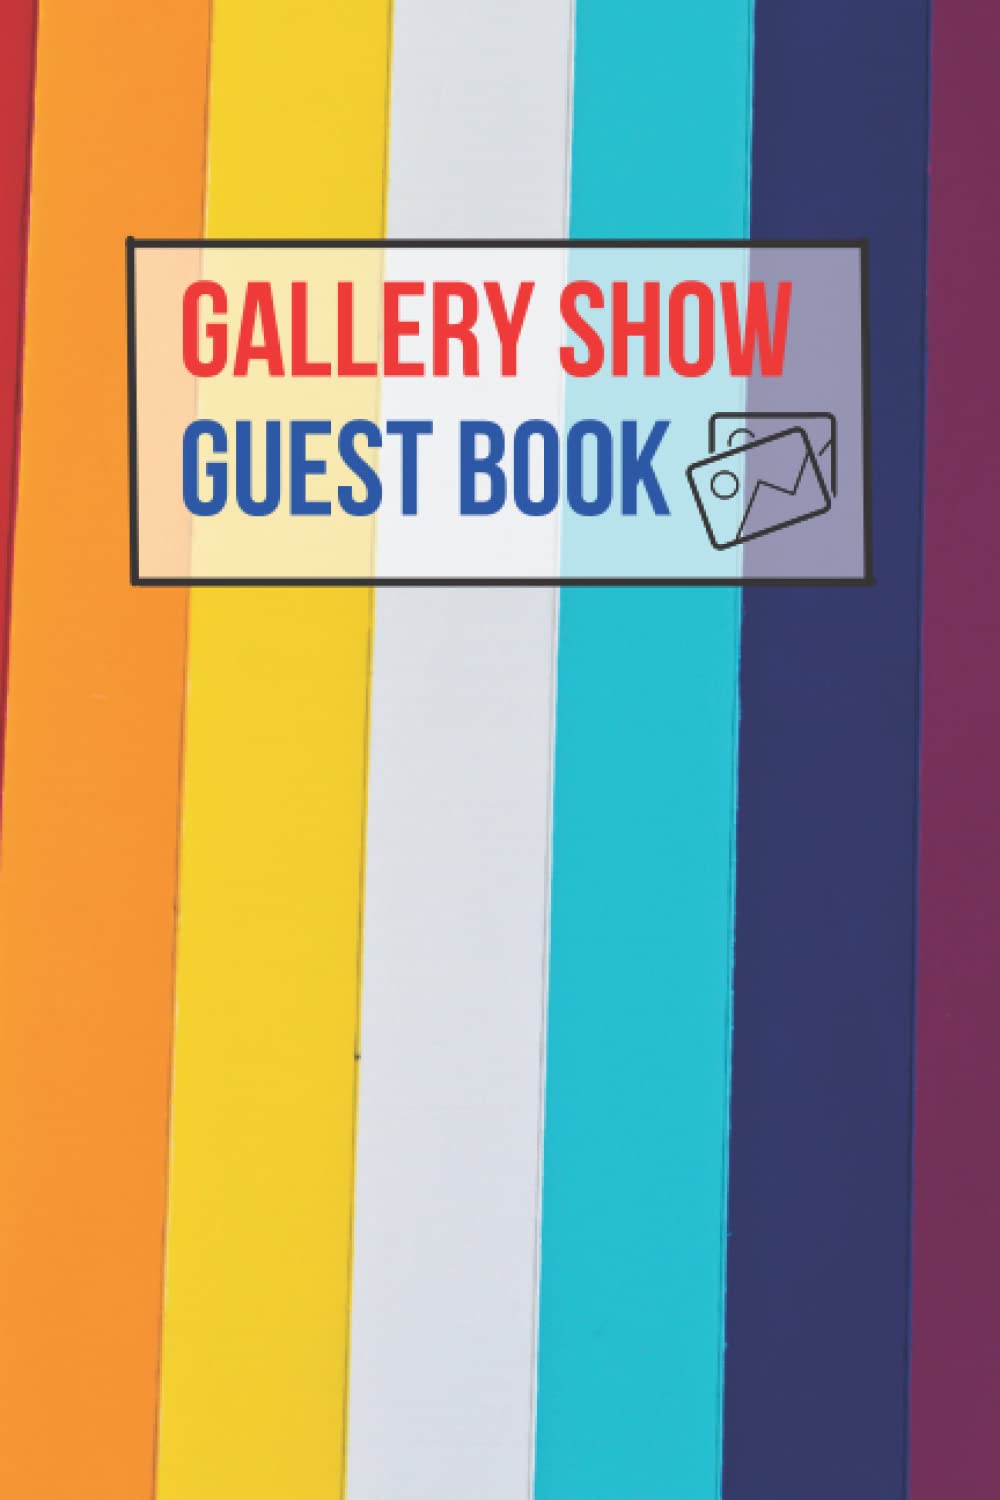 Gallery Show Guest Book: Guest Book For Visitors Of Art and Painting Events and Exhibitions To Sign In and To Write Comments and Messages